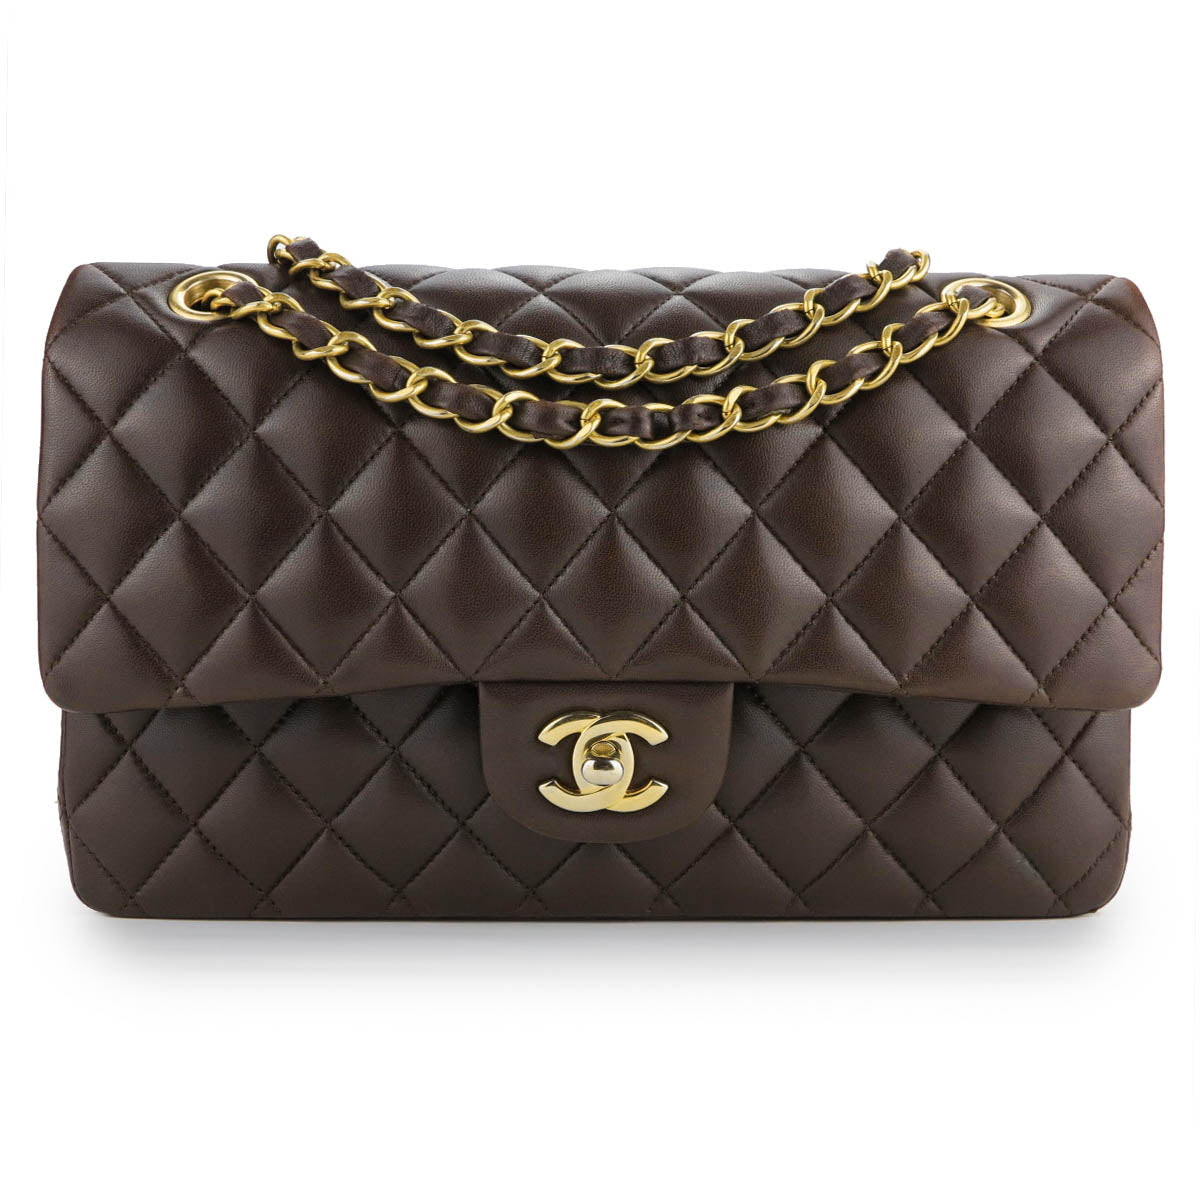 Chanel Reviews, Part II - The Classic Flap Bag - Extra Petite